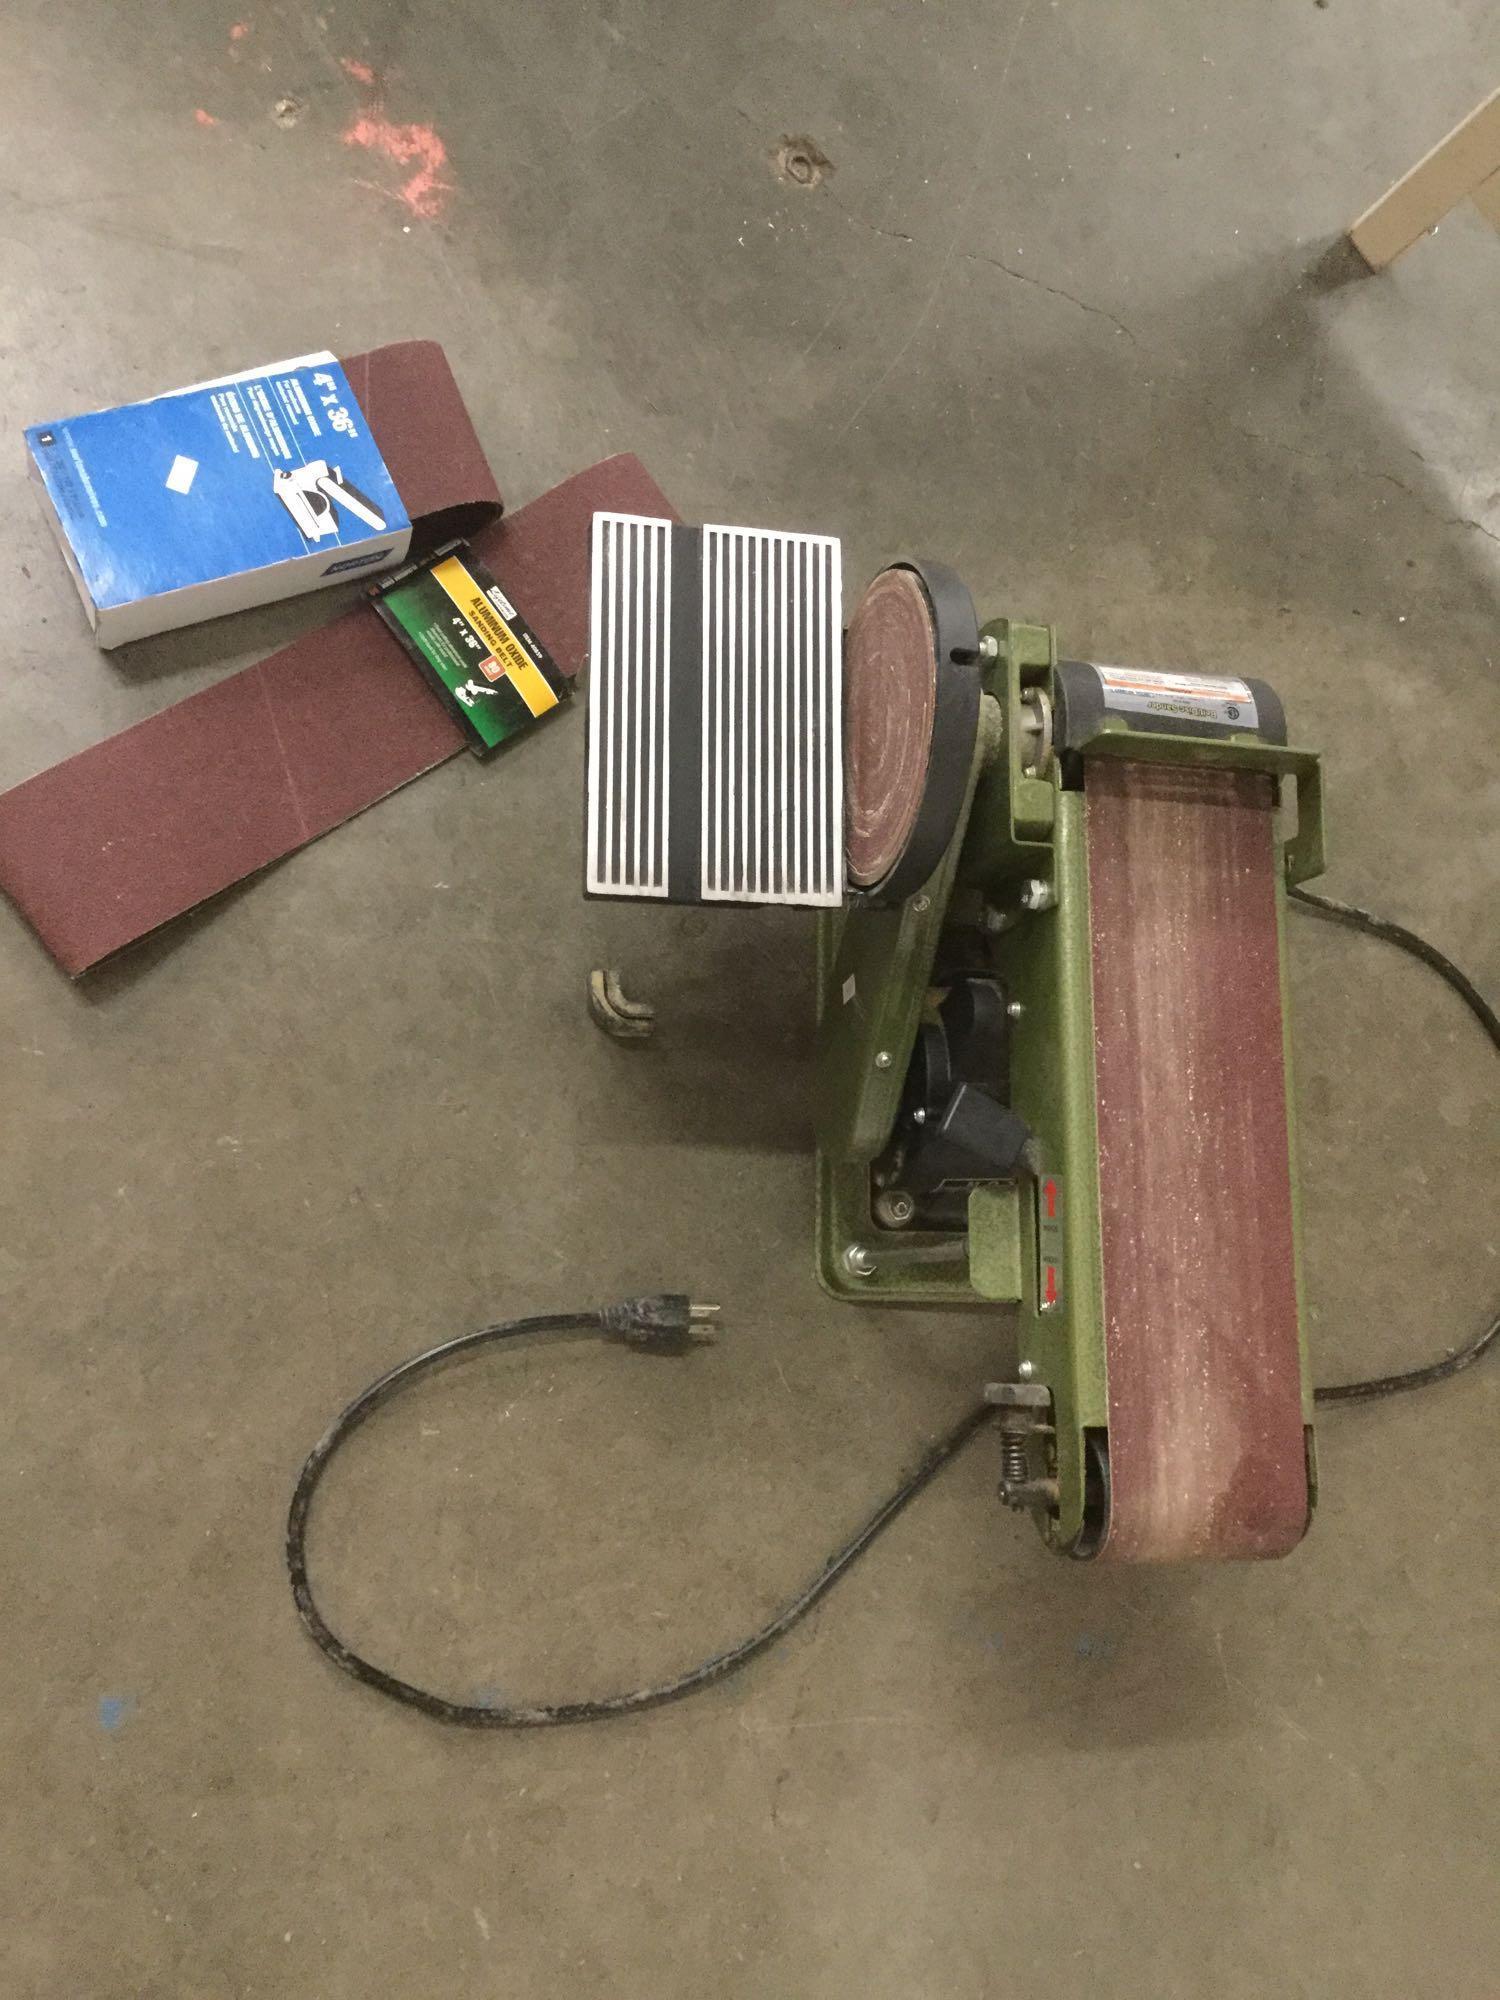 Central Machinery Belt/Disc Sander w/ two replacement belts